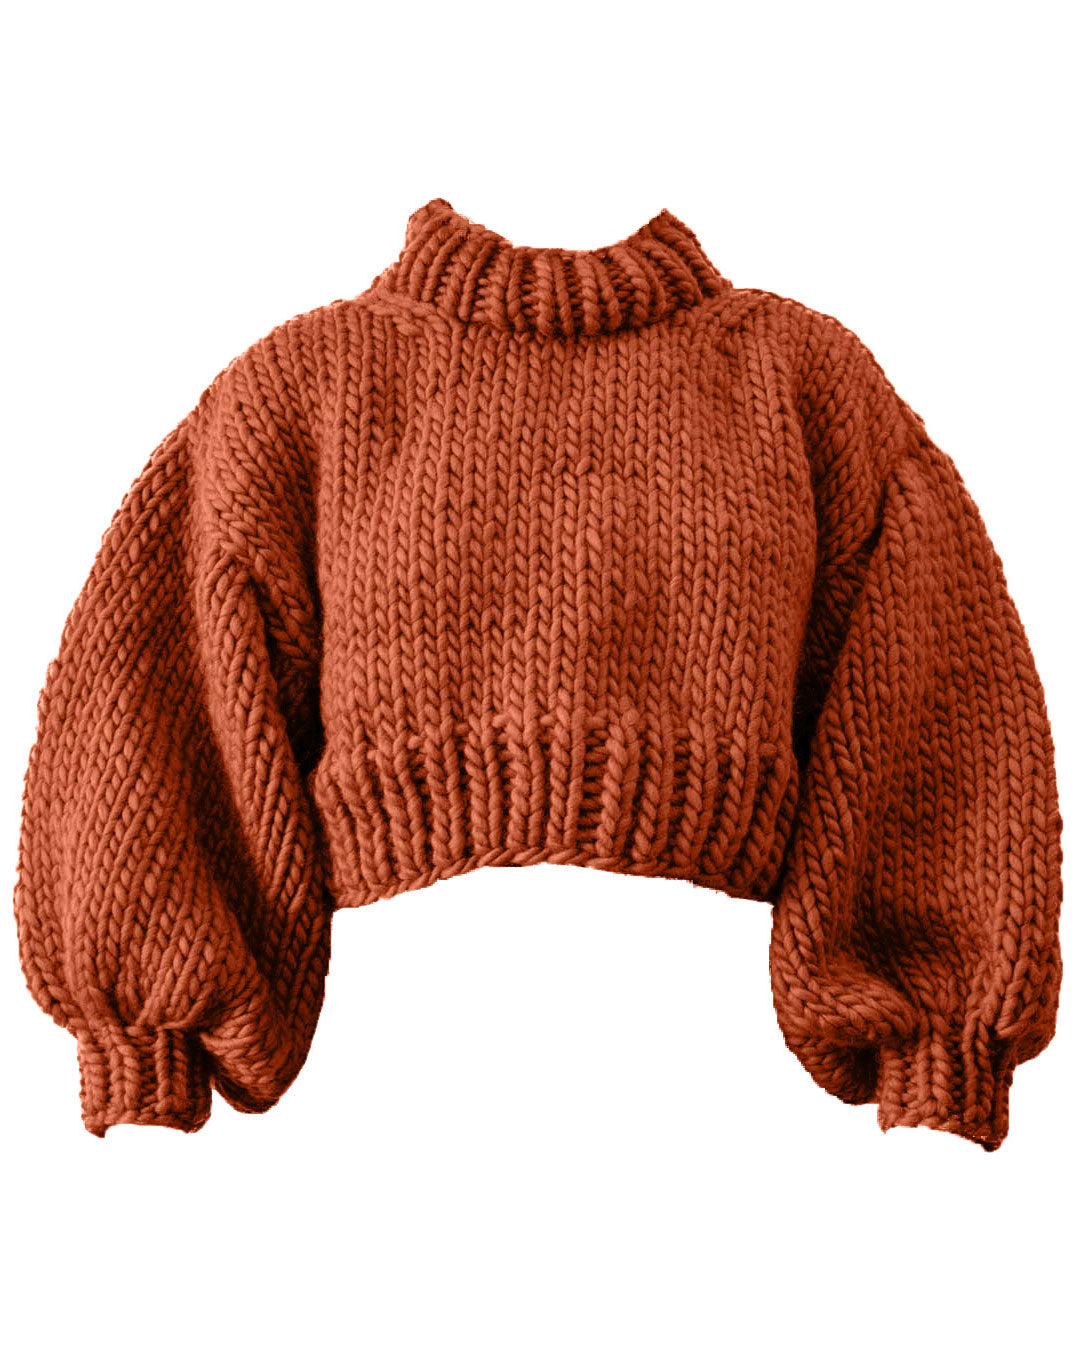 The Chester Jumper